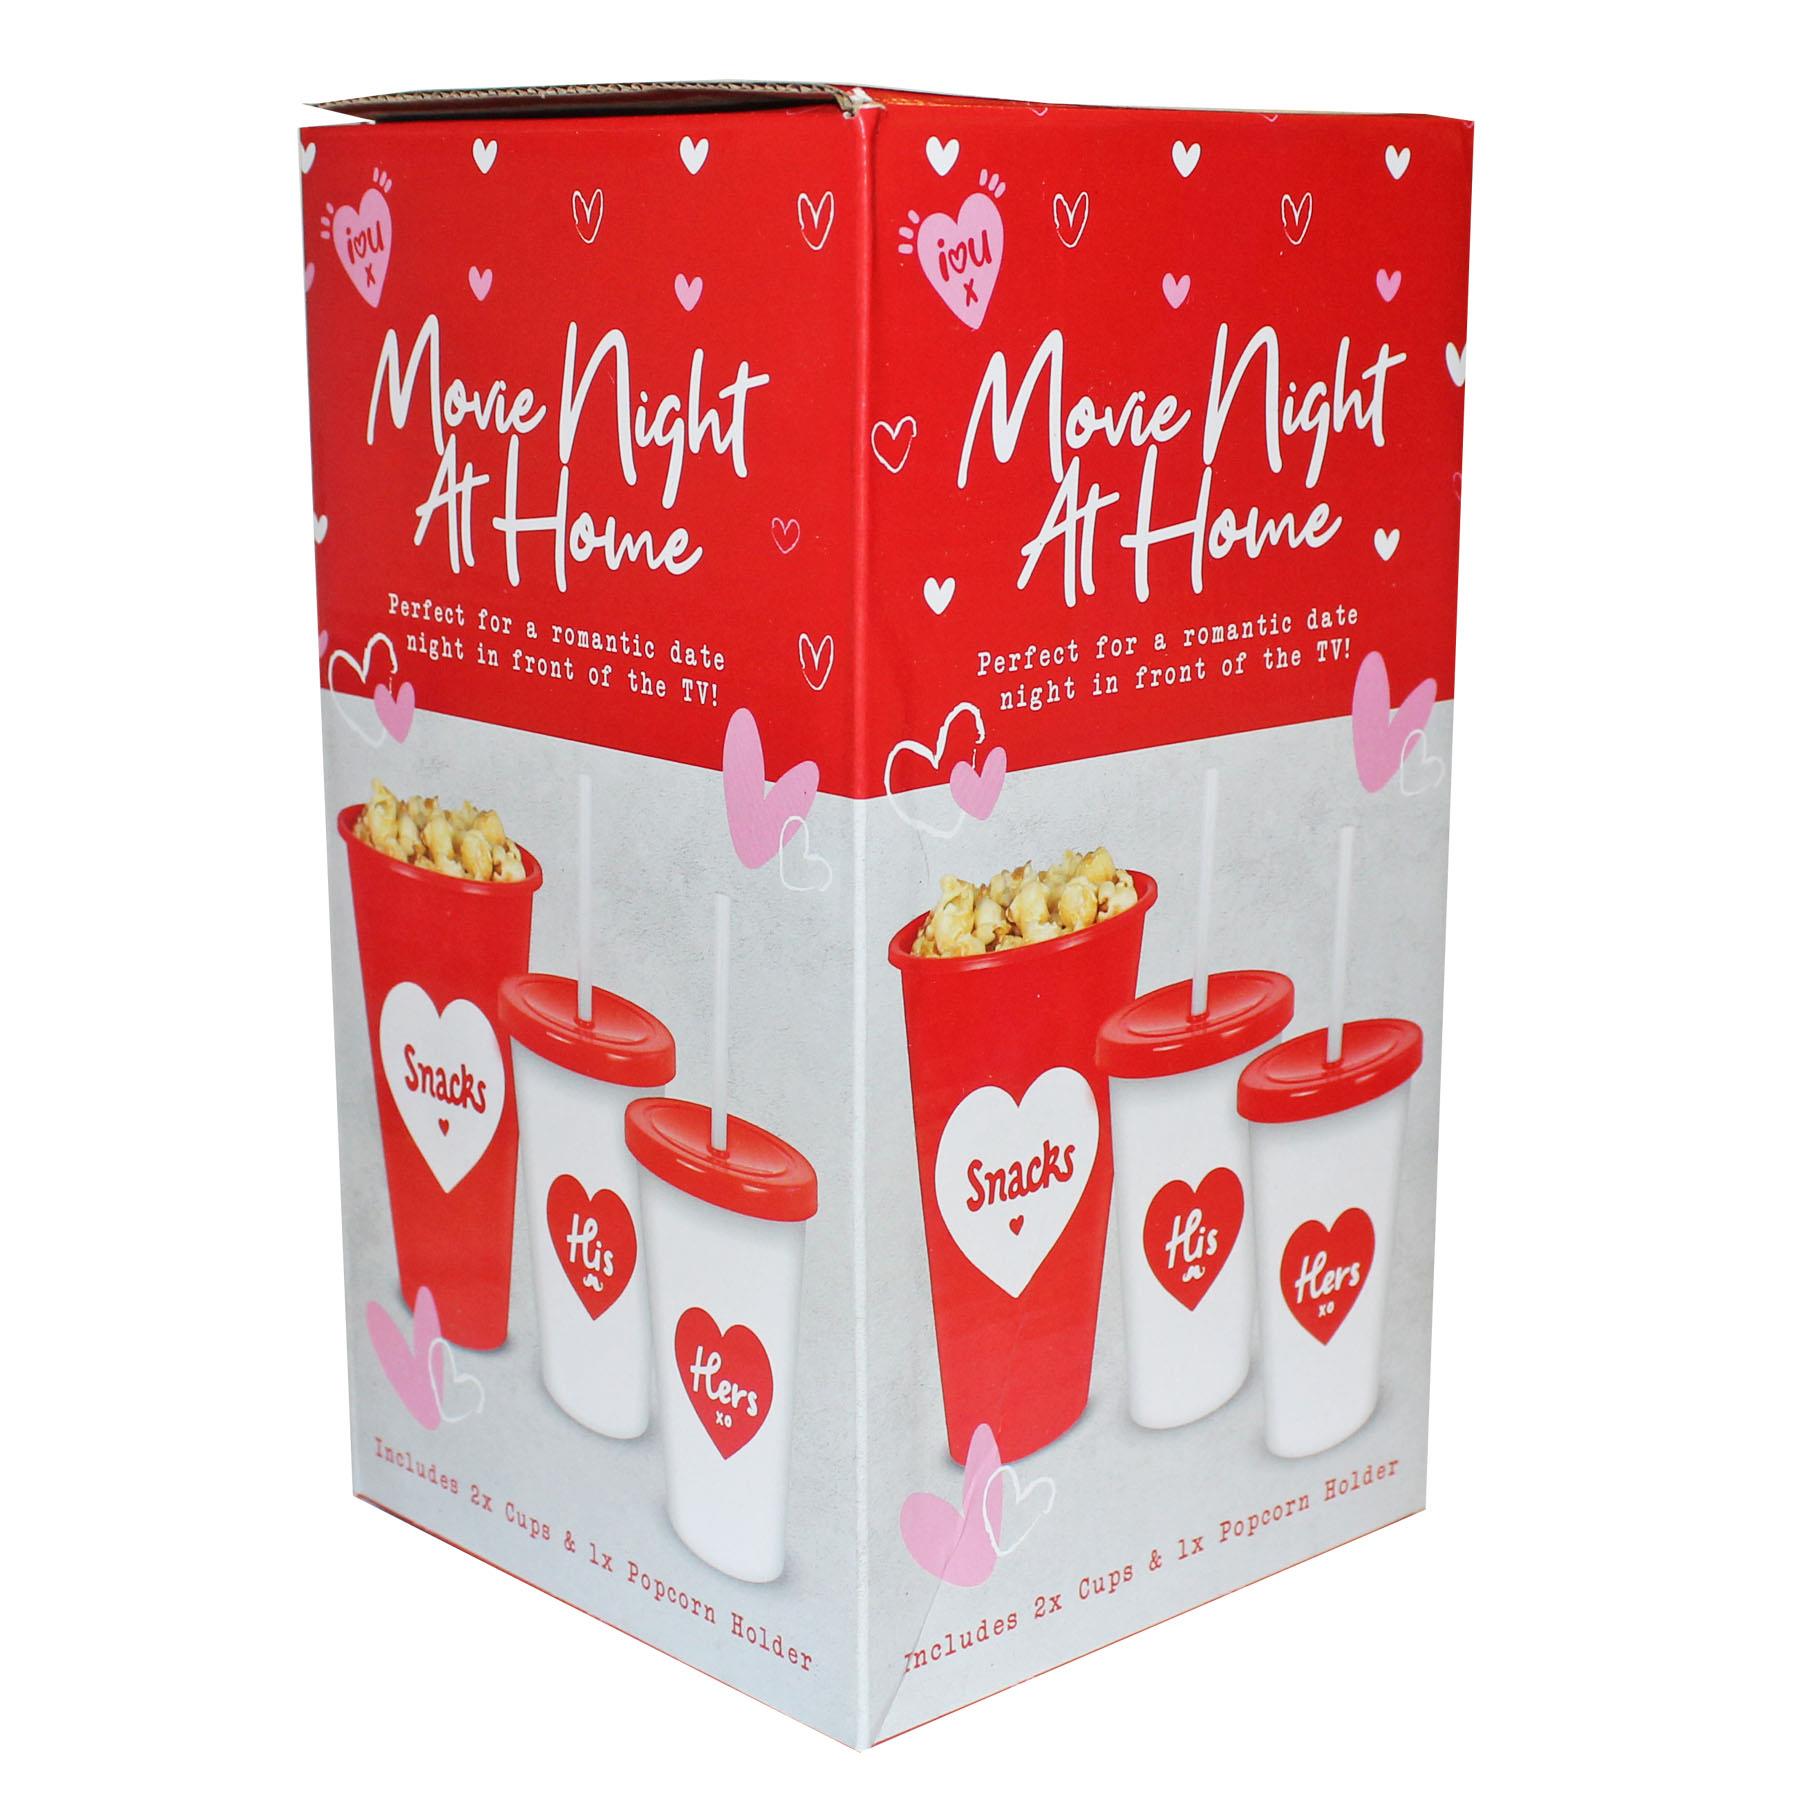 Valentines Movie Night At Home Date Night Set - Popcorn Holder, and 2 Cups with Straws